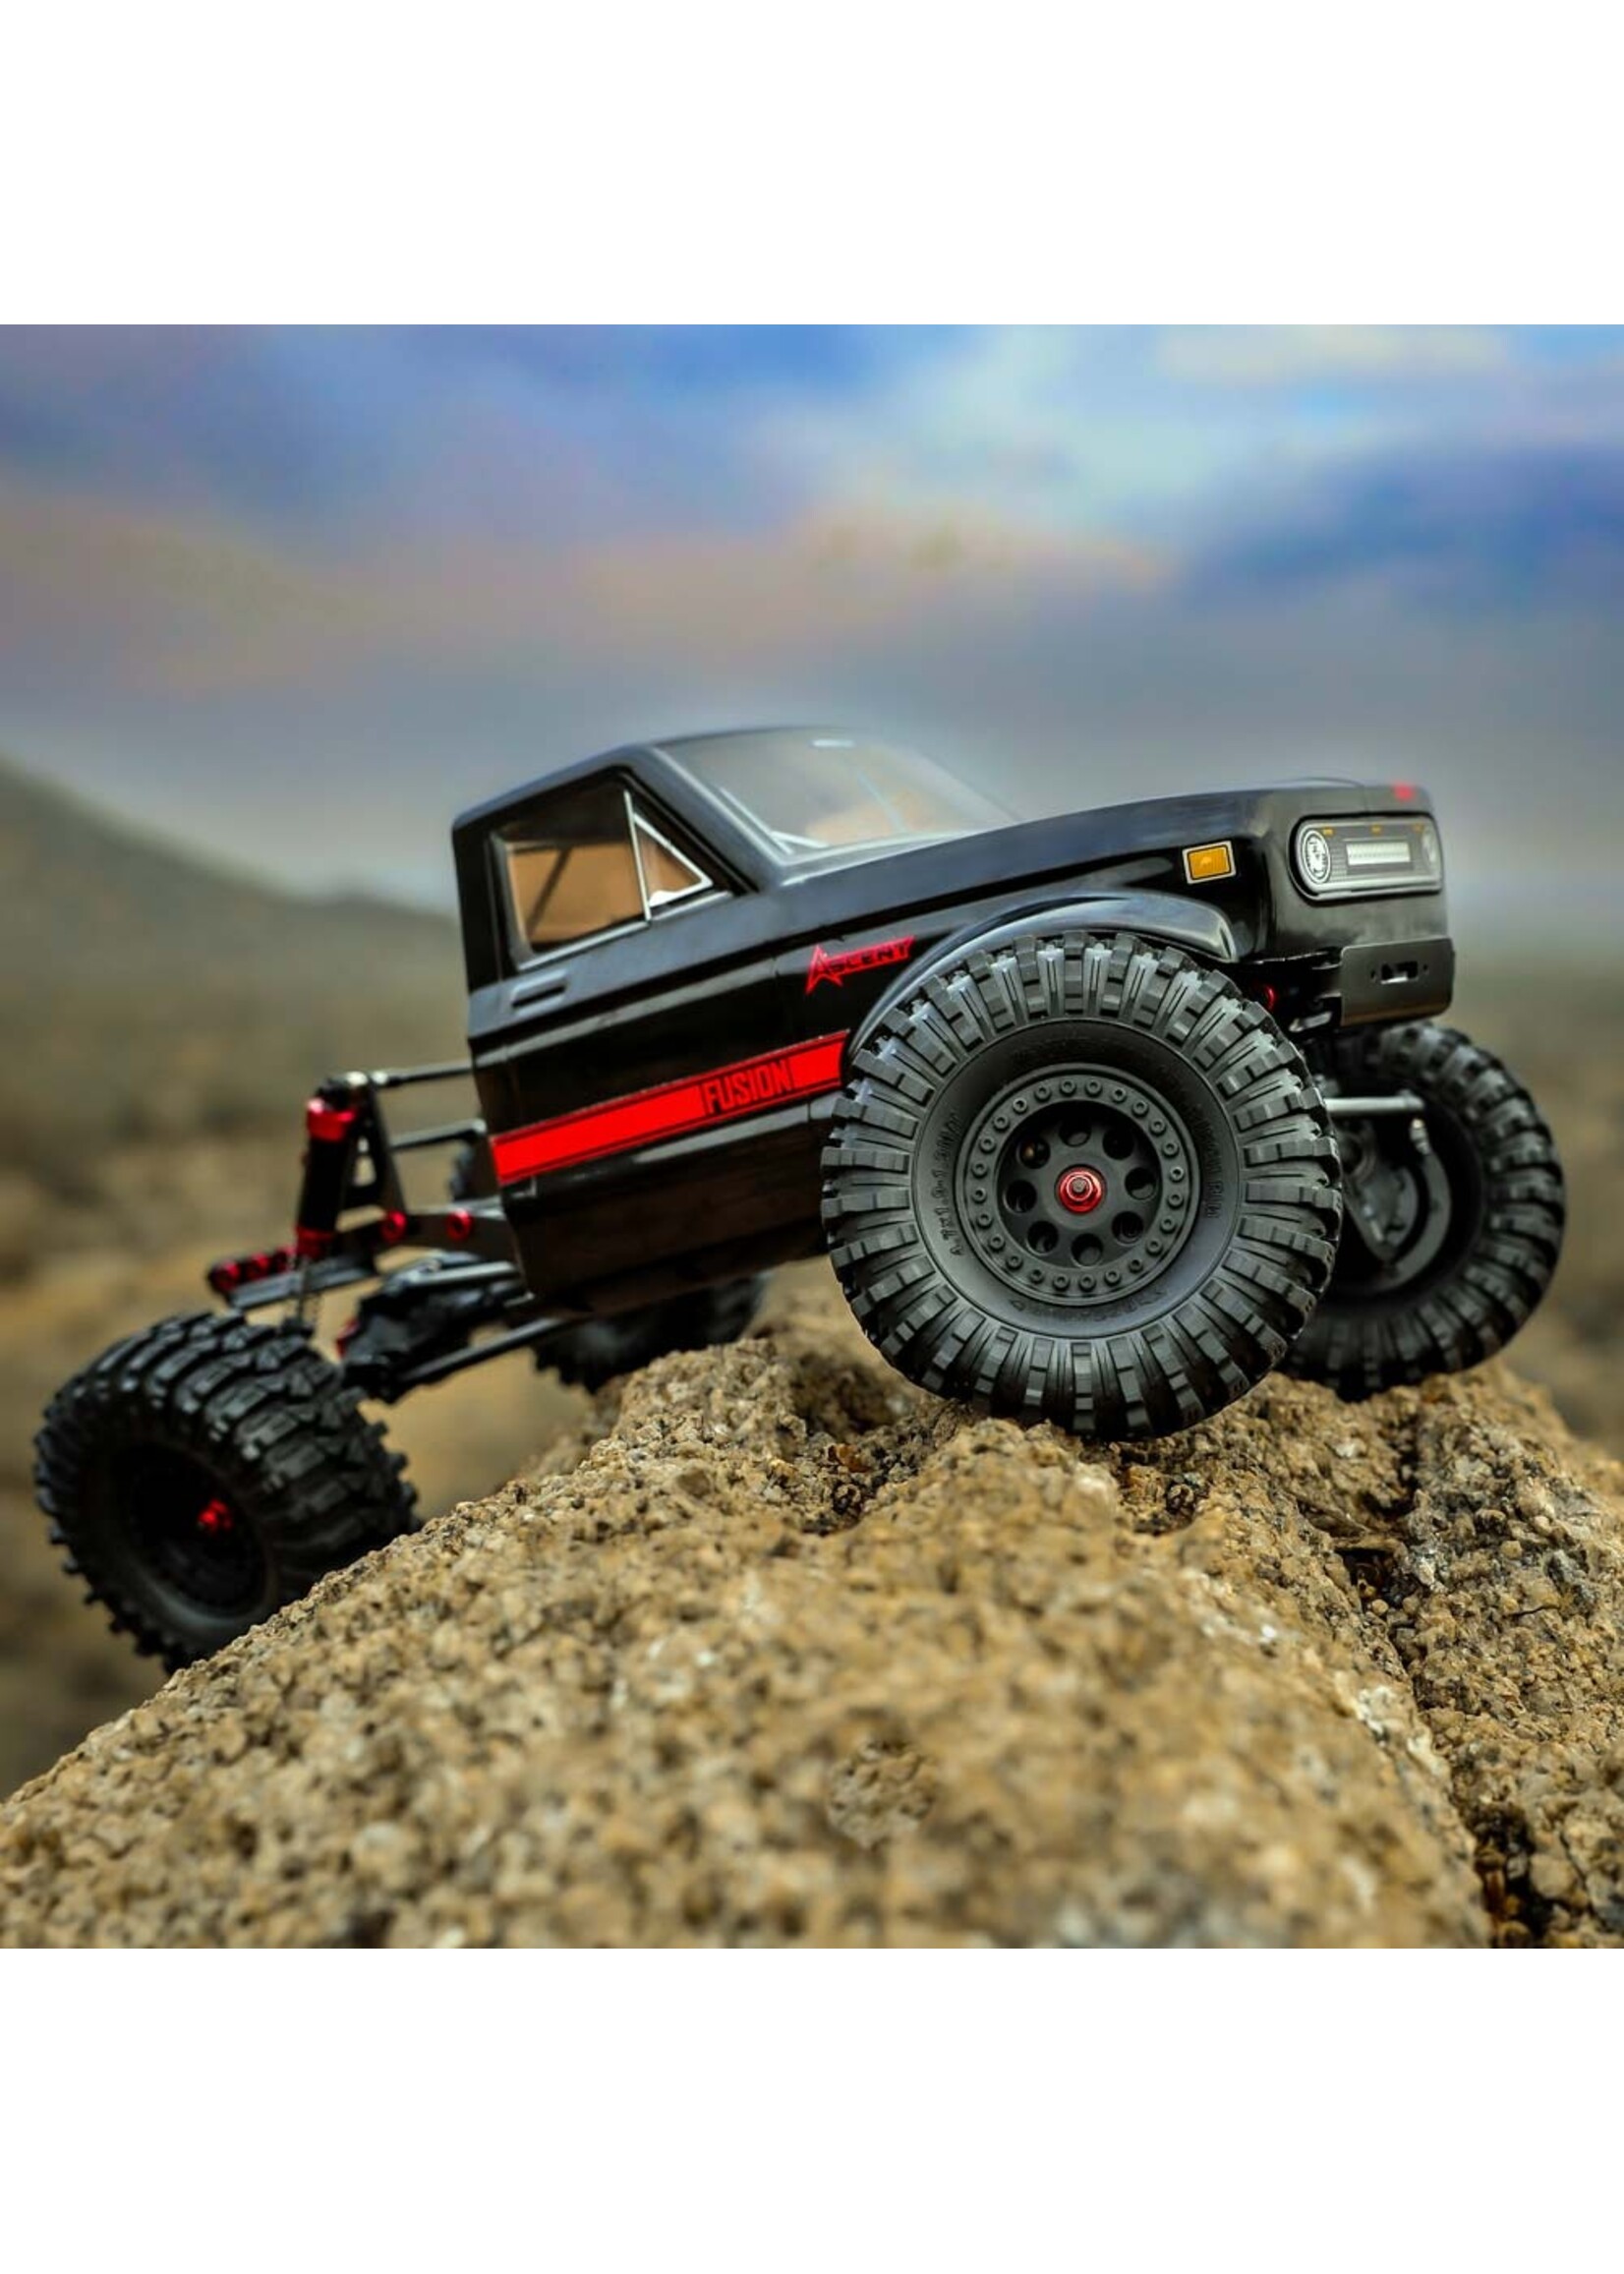 Redcat Racing RER31524 Redcat Racing Ascent Fusion 1/10 Scale Brushless Crawler